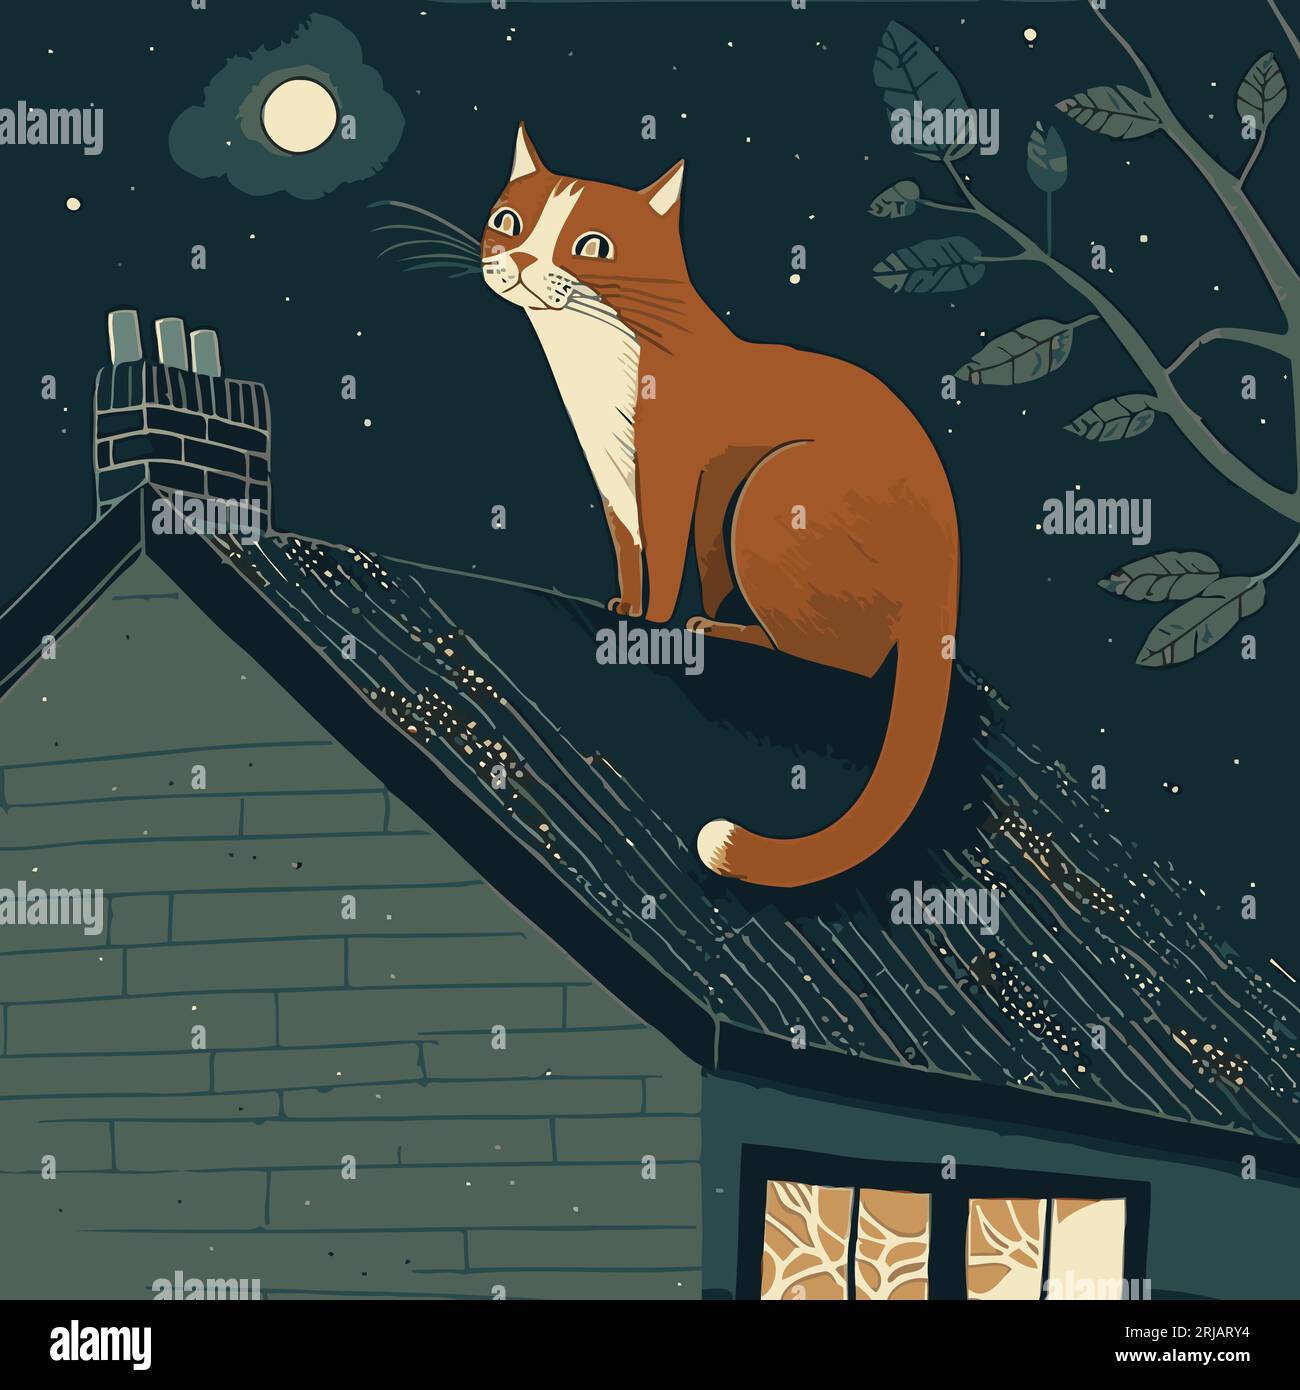 A Cute Storybook Style Ginger Cat Sitting on the Roof of a House under a Full Moon. Vector Art. Orange Tabby Kitty on the Roof of a Quaint Cottage. Stock Vector